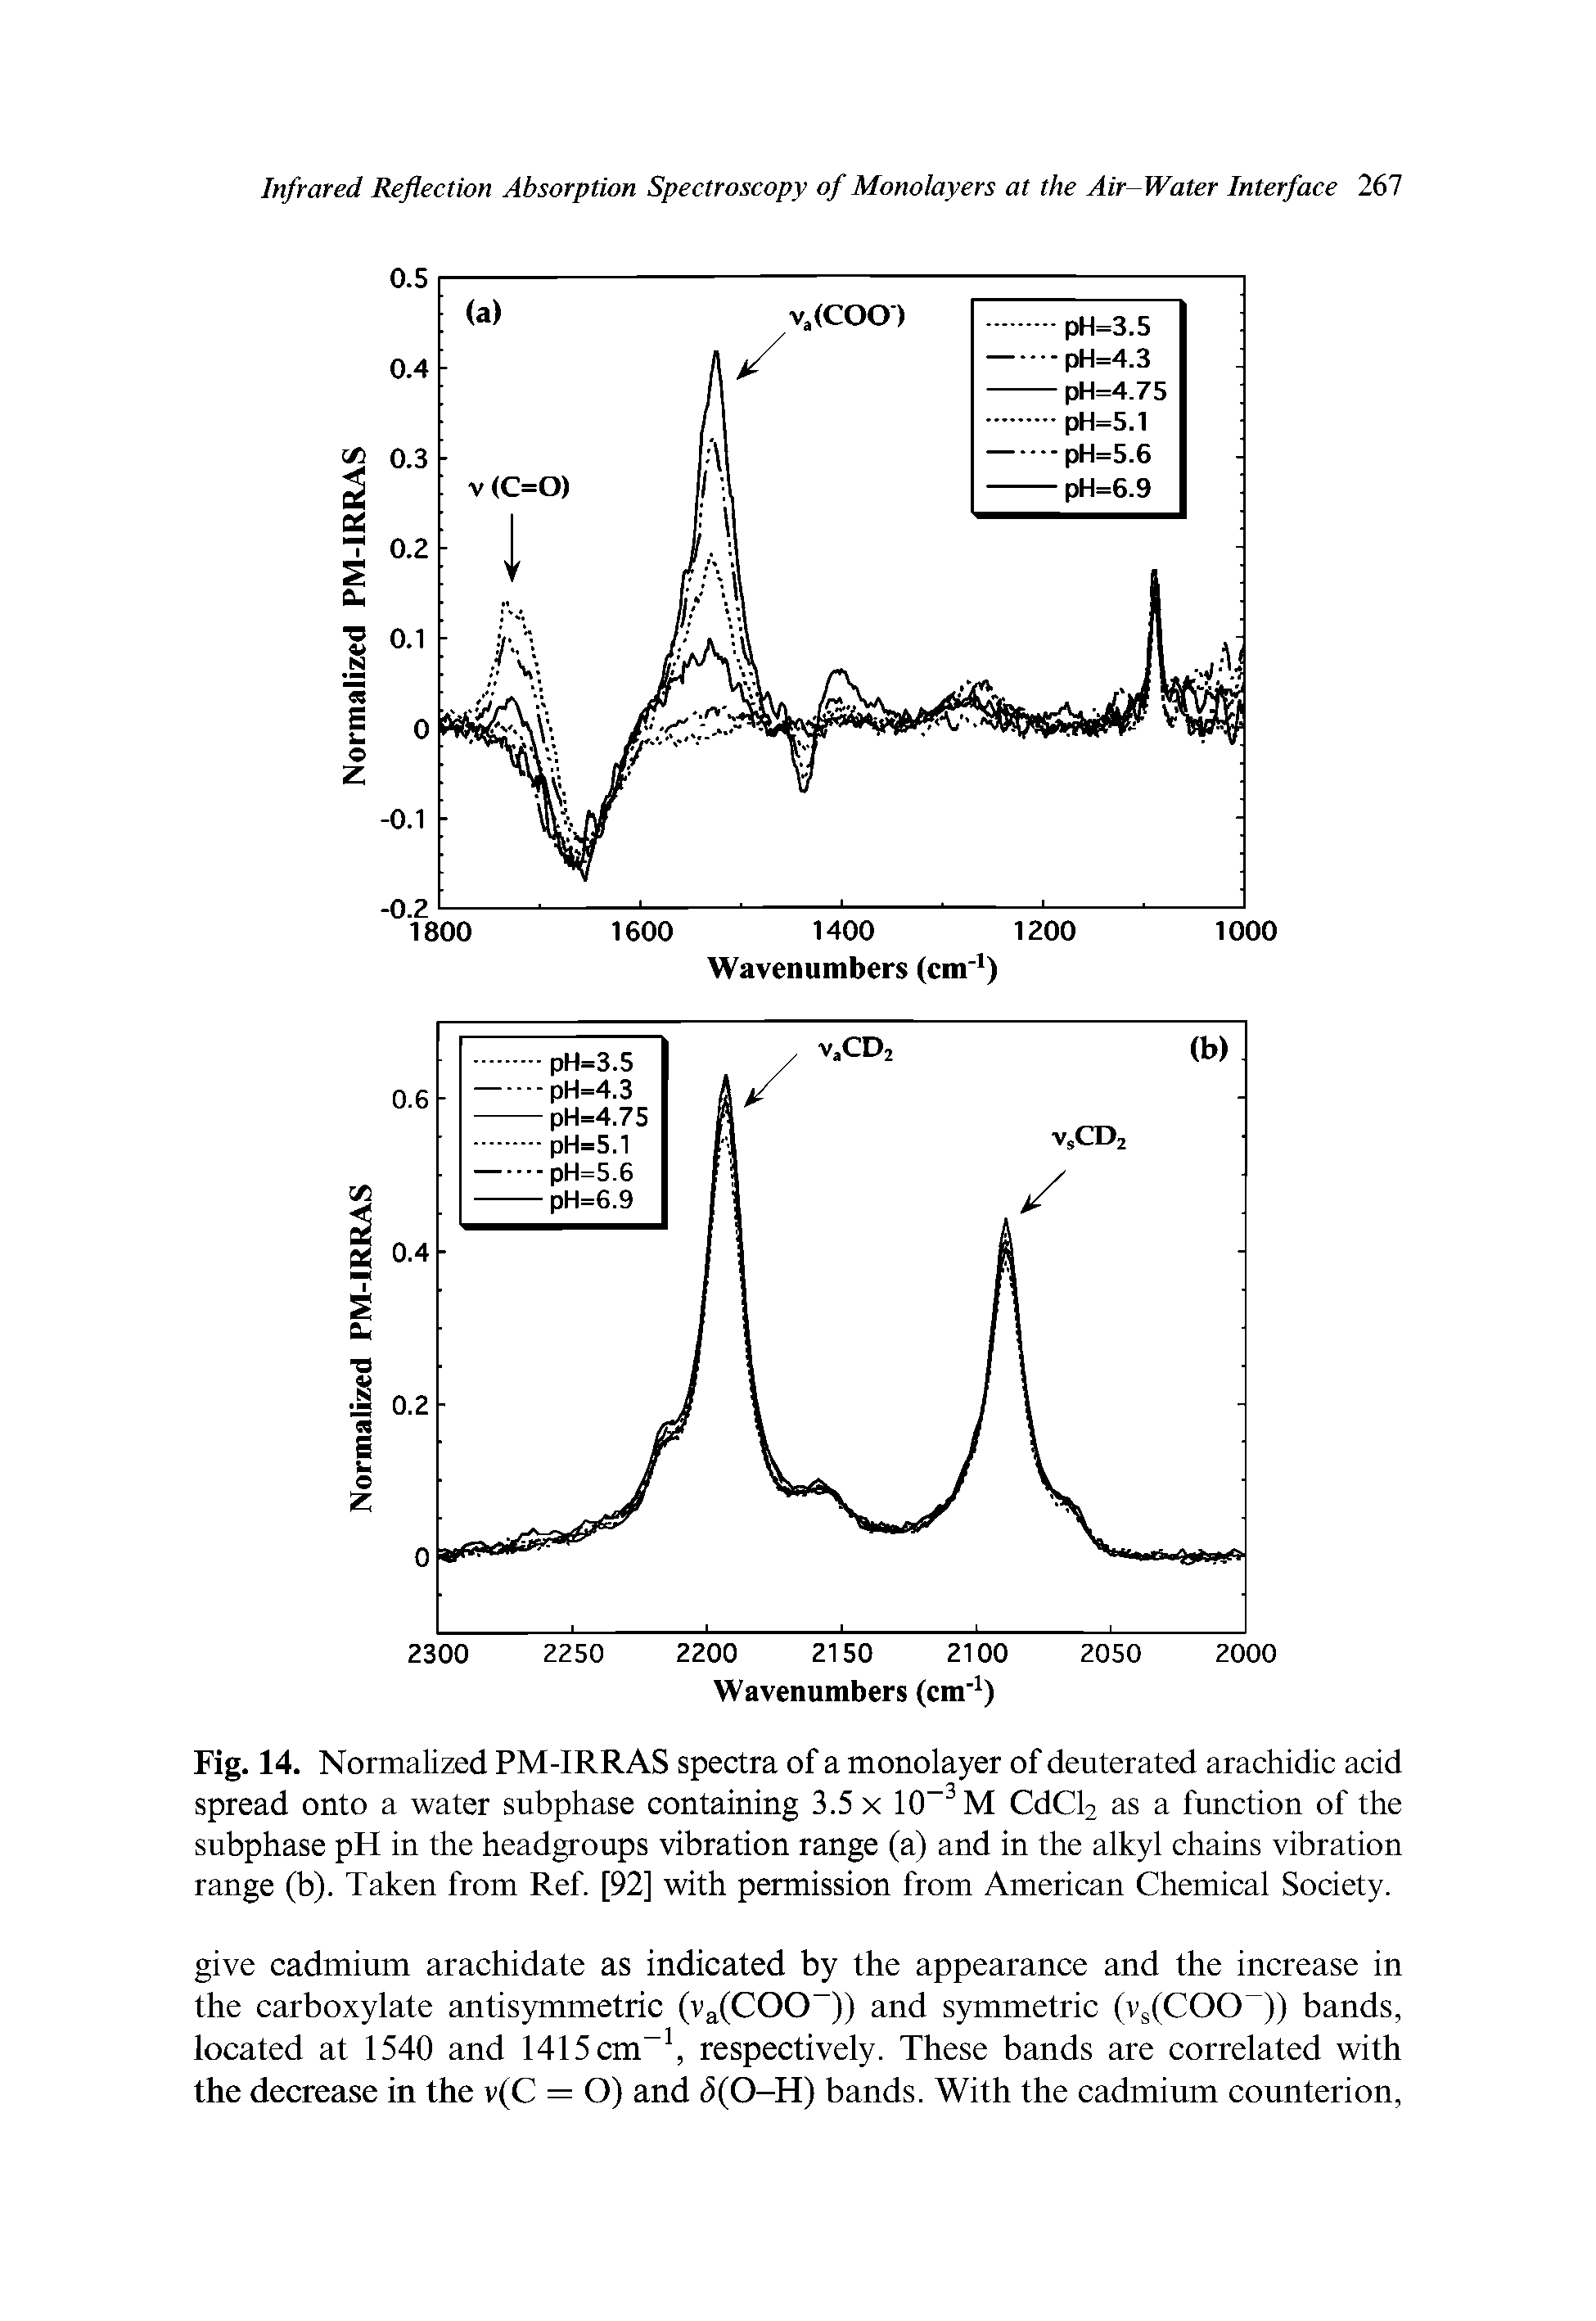 Fig. 14. Normalized PM-IRRAS spectra of a monolayer of deuterated arachidic acid spread onto a water subphase containing 3.5 x 10-3M CdCl2 as a function of the subphase pH in the headgroups vibration range (a) and in the alkyl chains vibration range (b). Taken from Ref. [92] with permission from American Chemical Society.